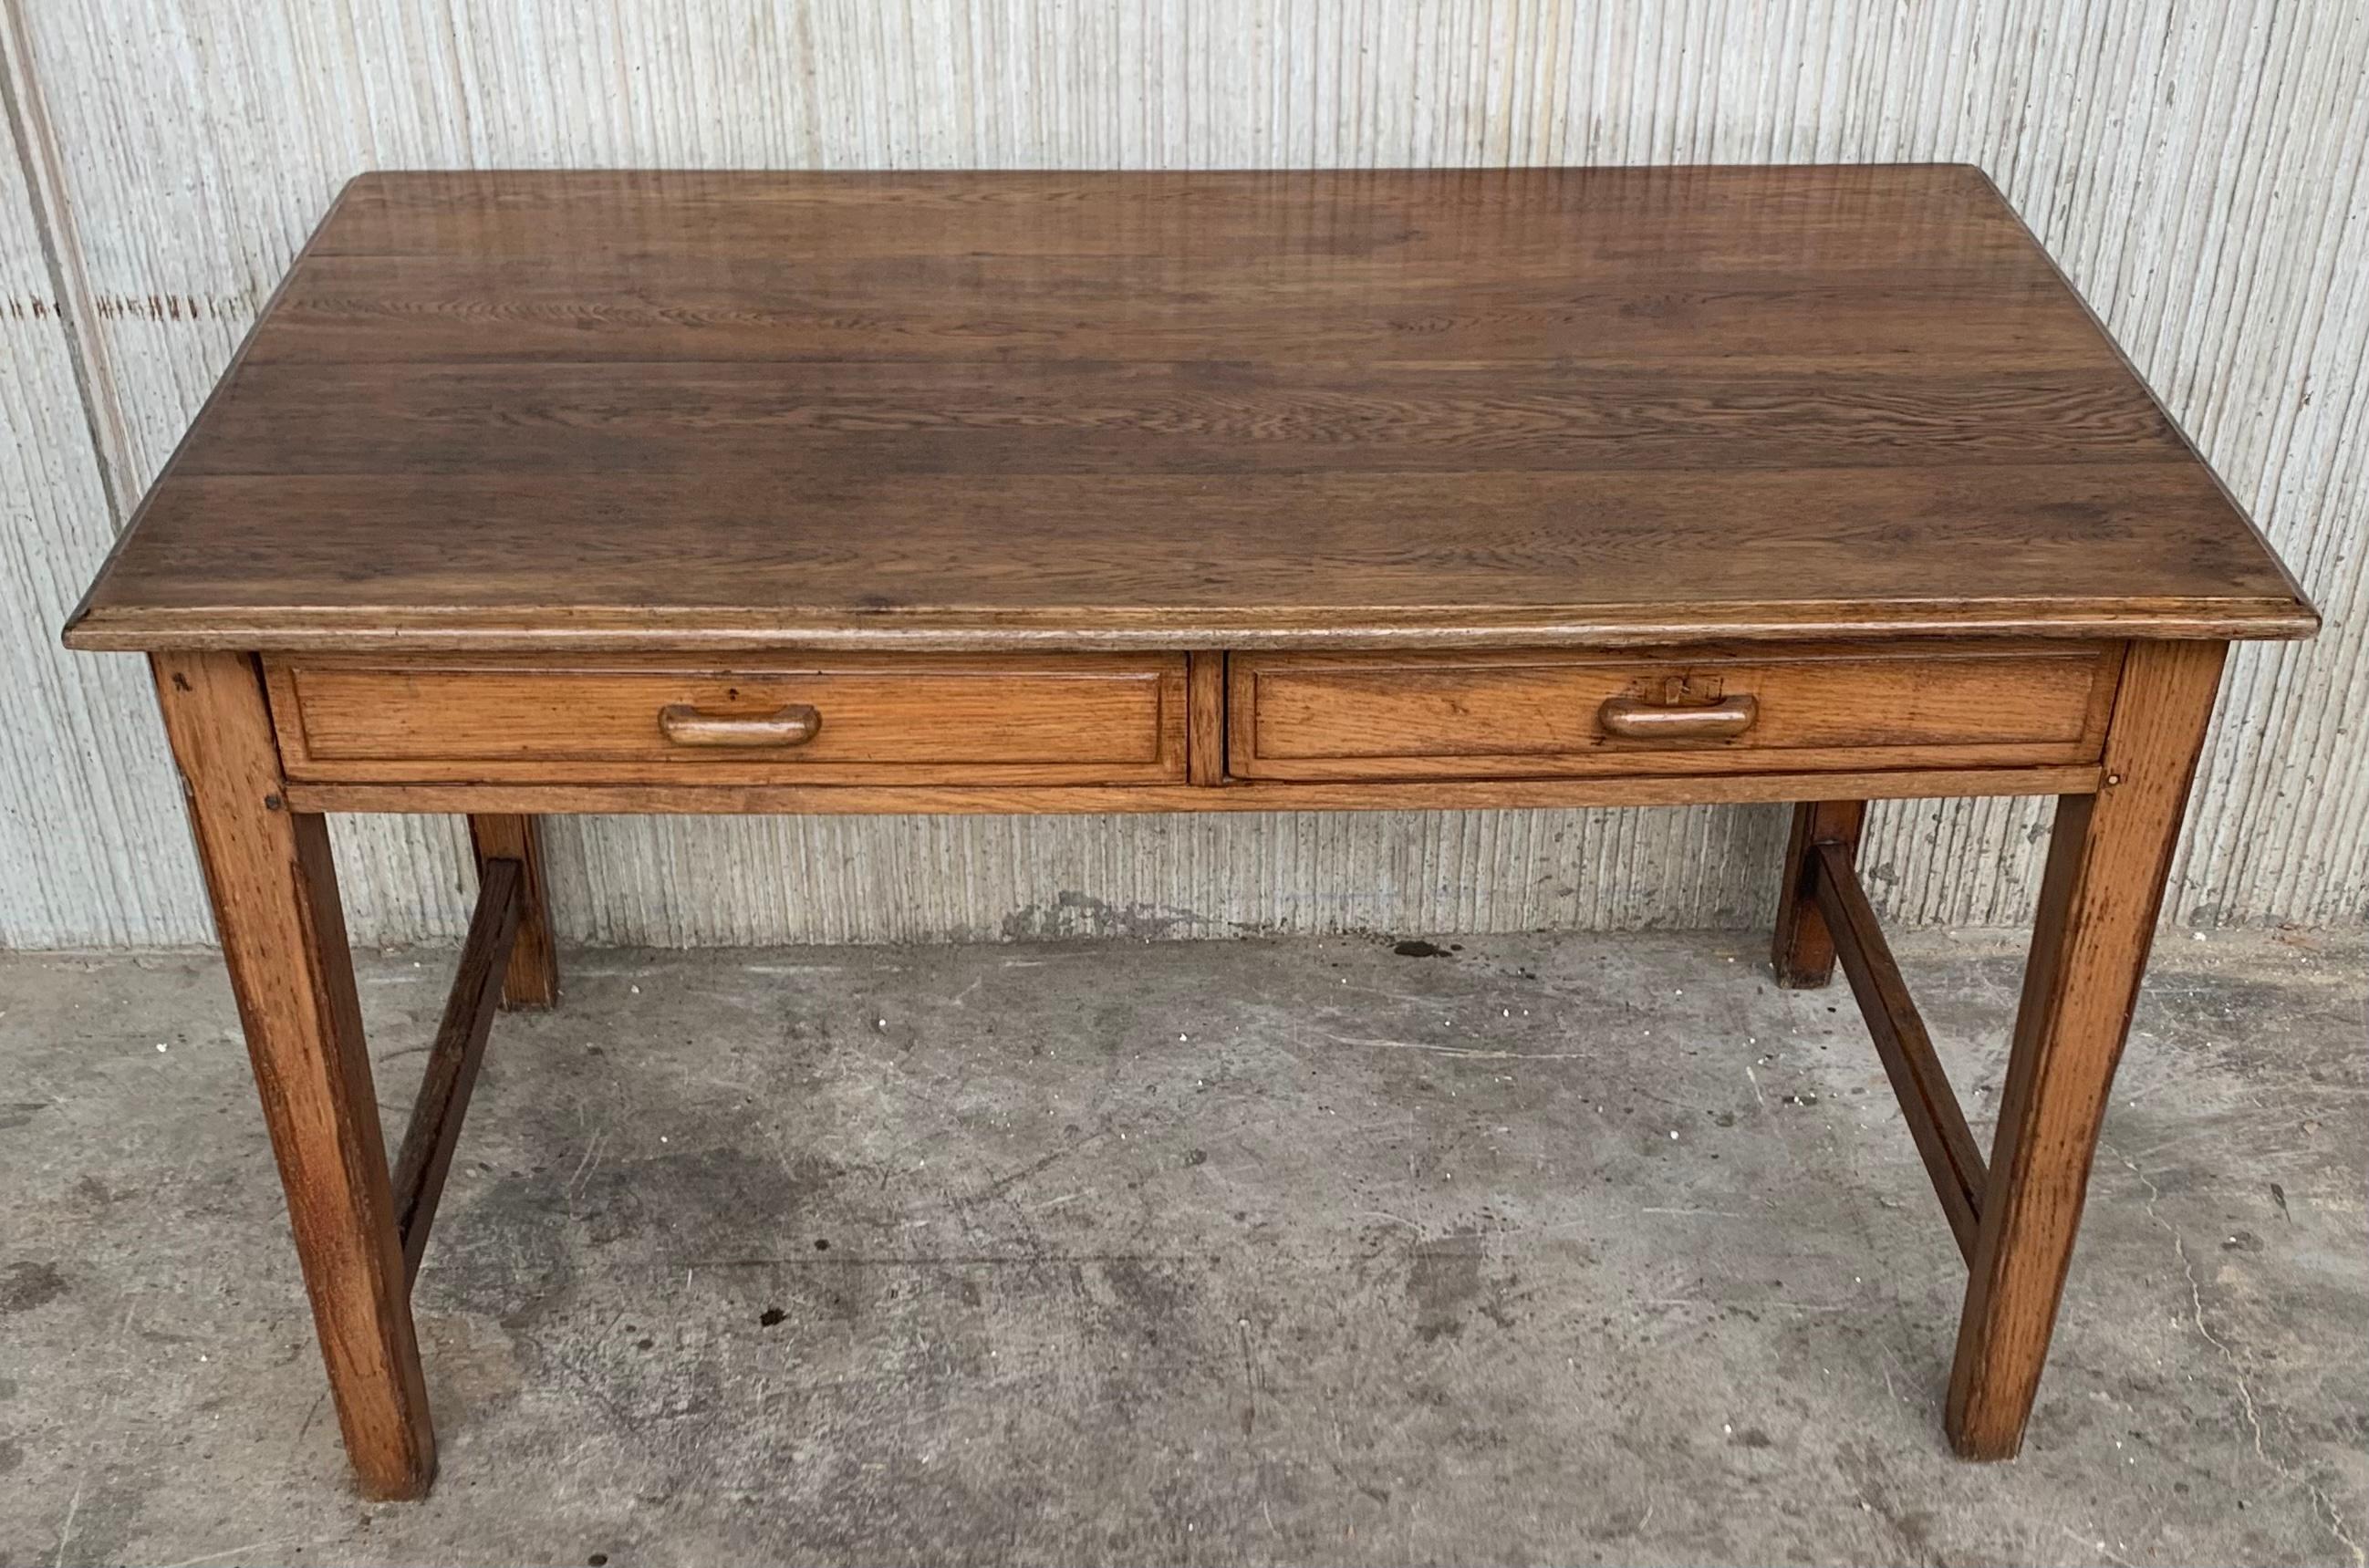 Spanish Colonial Early 20th Spanish Mobila Country Farm Desk with Two Drawers or Butcher Block